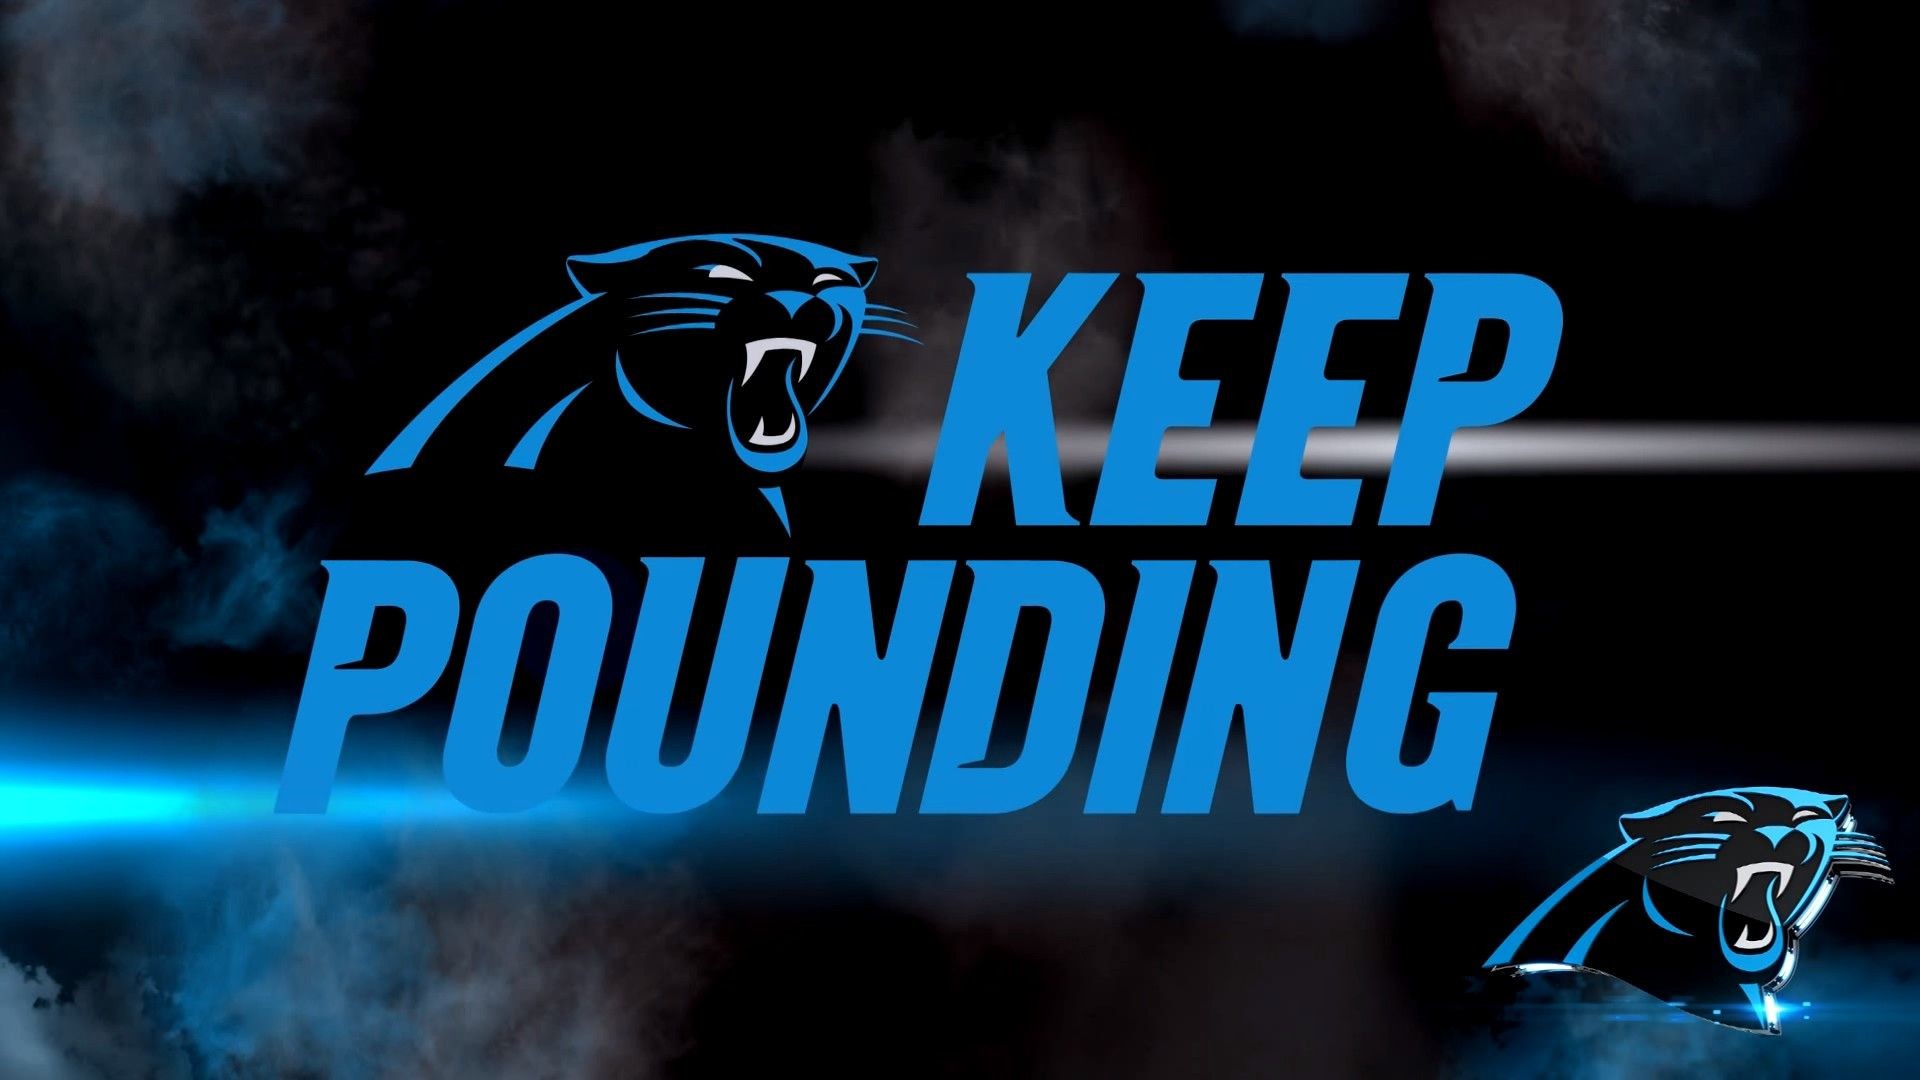 1920x1080 Wallpapers HD Carolina Panthers | Best NFL Wallpapers